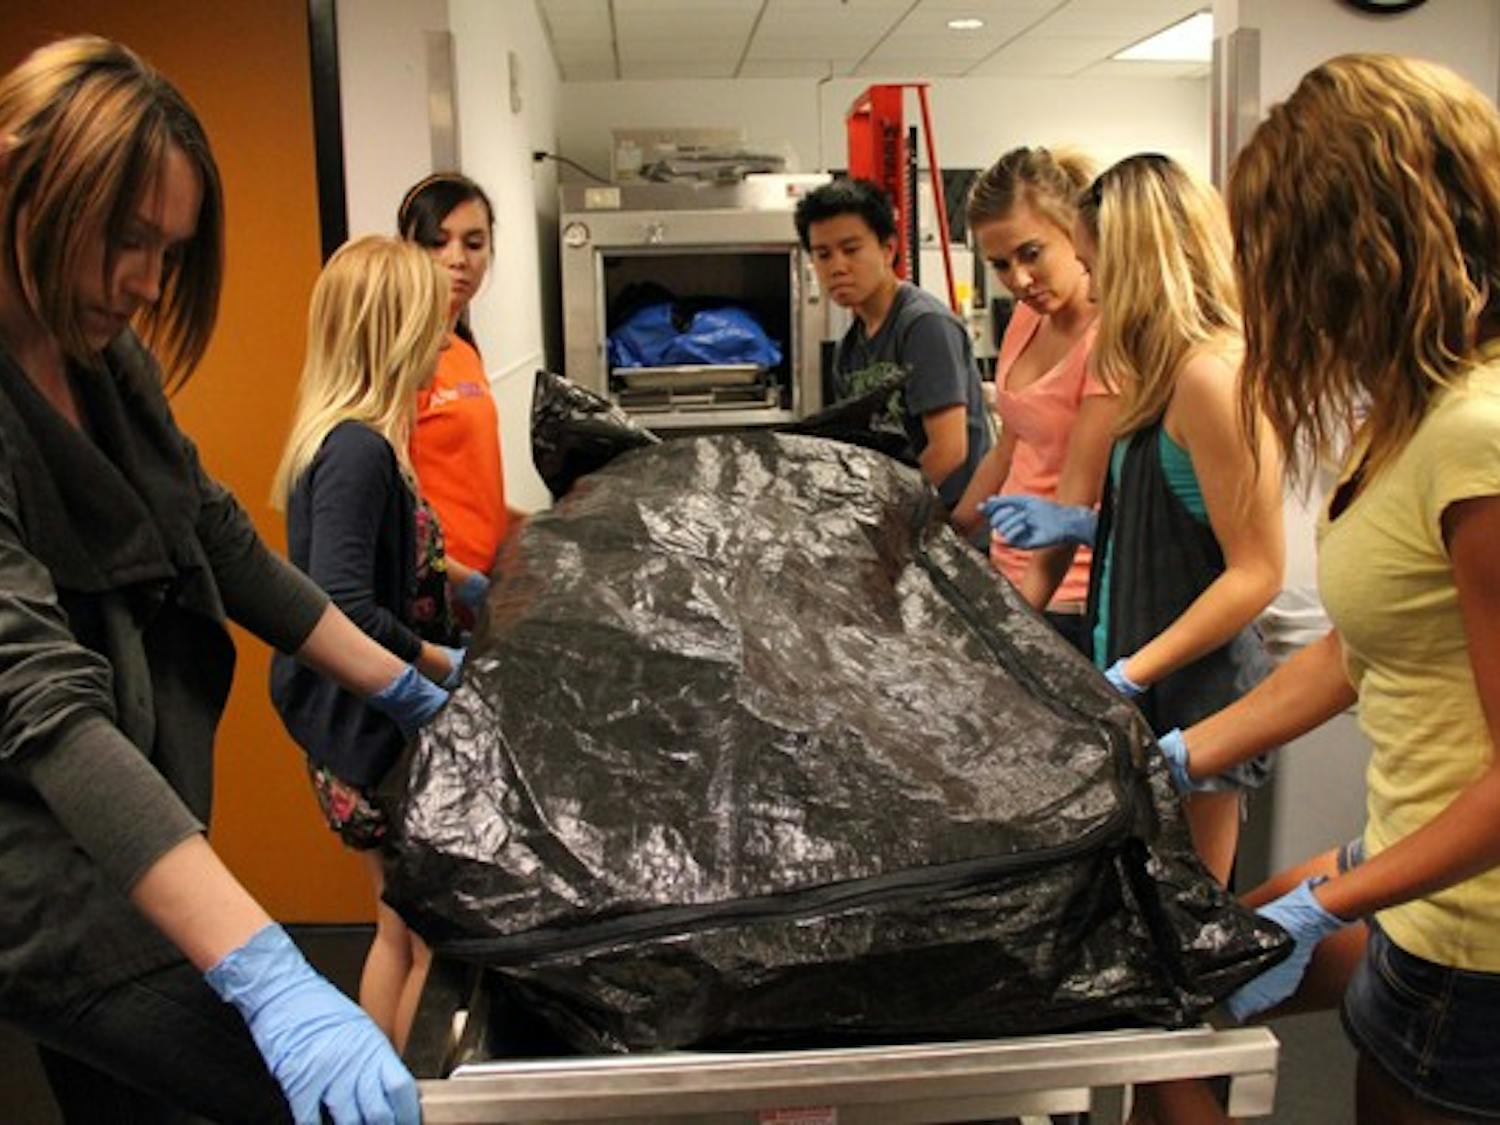 ASU students in BIO 494 use a forklift to move cadavers into a freezer in the University Center Building on the Downtown campus Wednesday afternoon. The students are studying bodies to learn about the human anatomy. (Photo by Diana Lustig)